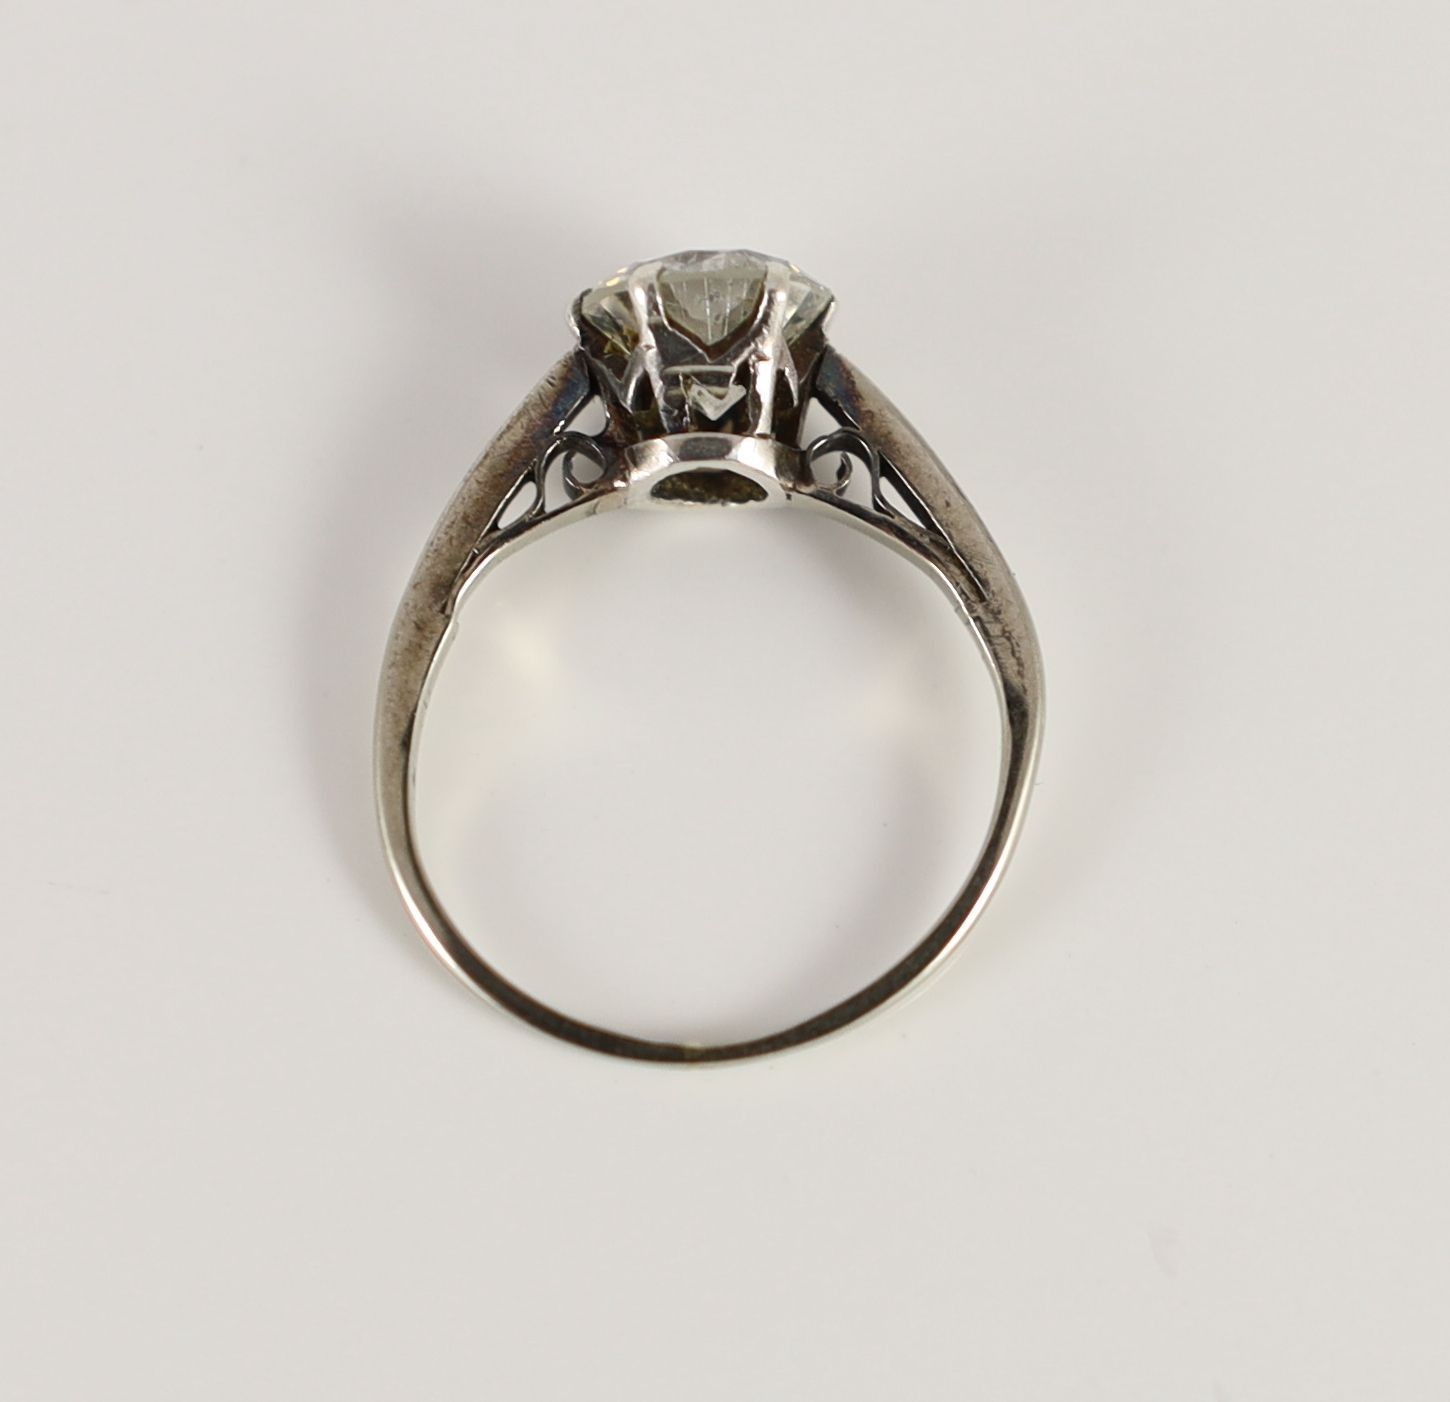 A 9ct white gold and solitaire diamond ring